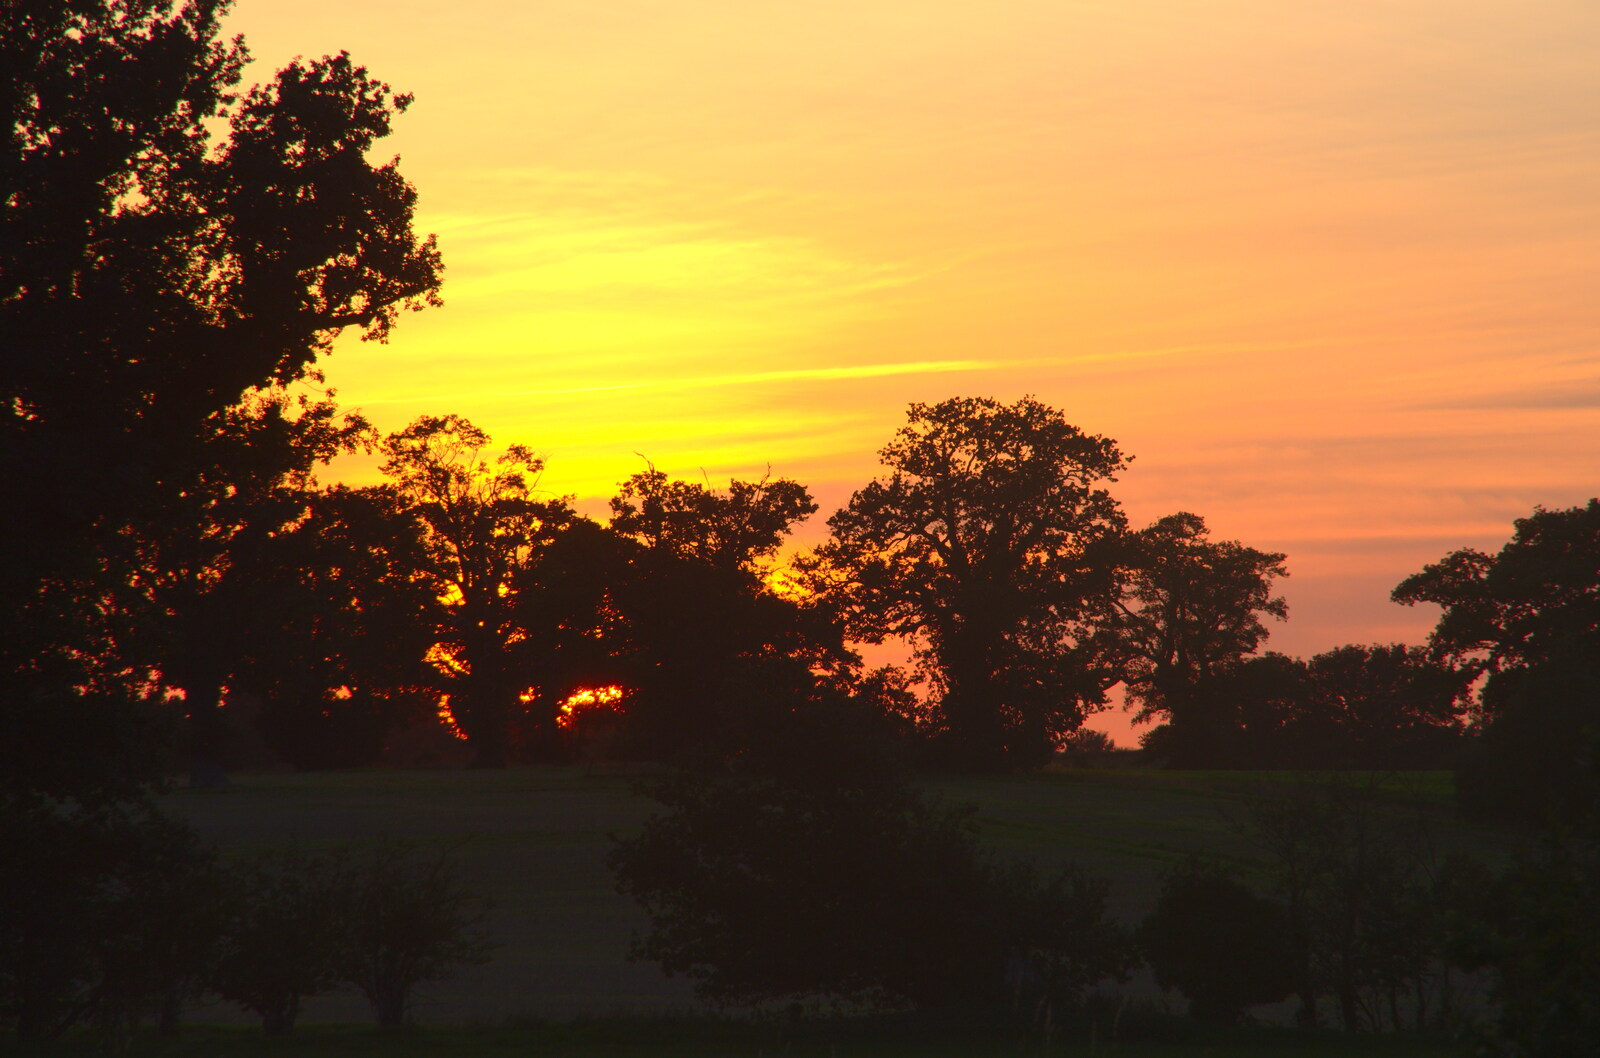 The sun sets over Redgrave from Star Wing's Hops and Hogs Festival, Redgrave, Suffolk - 12th September 2020